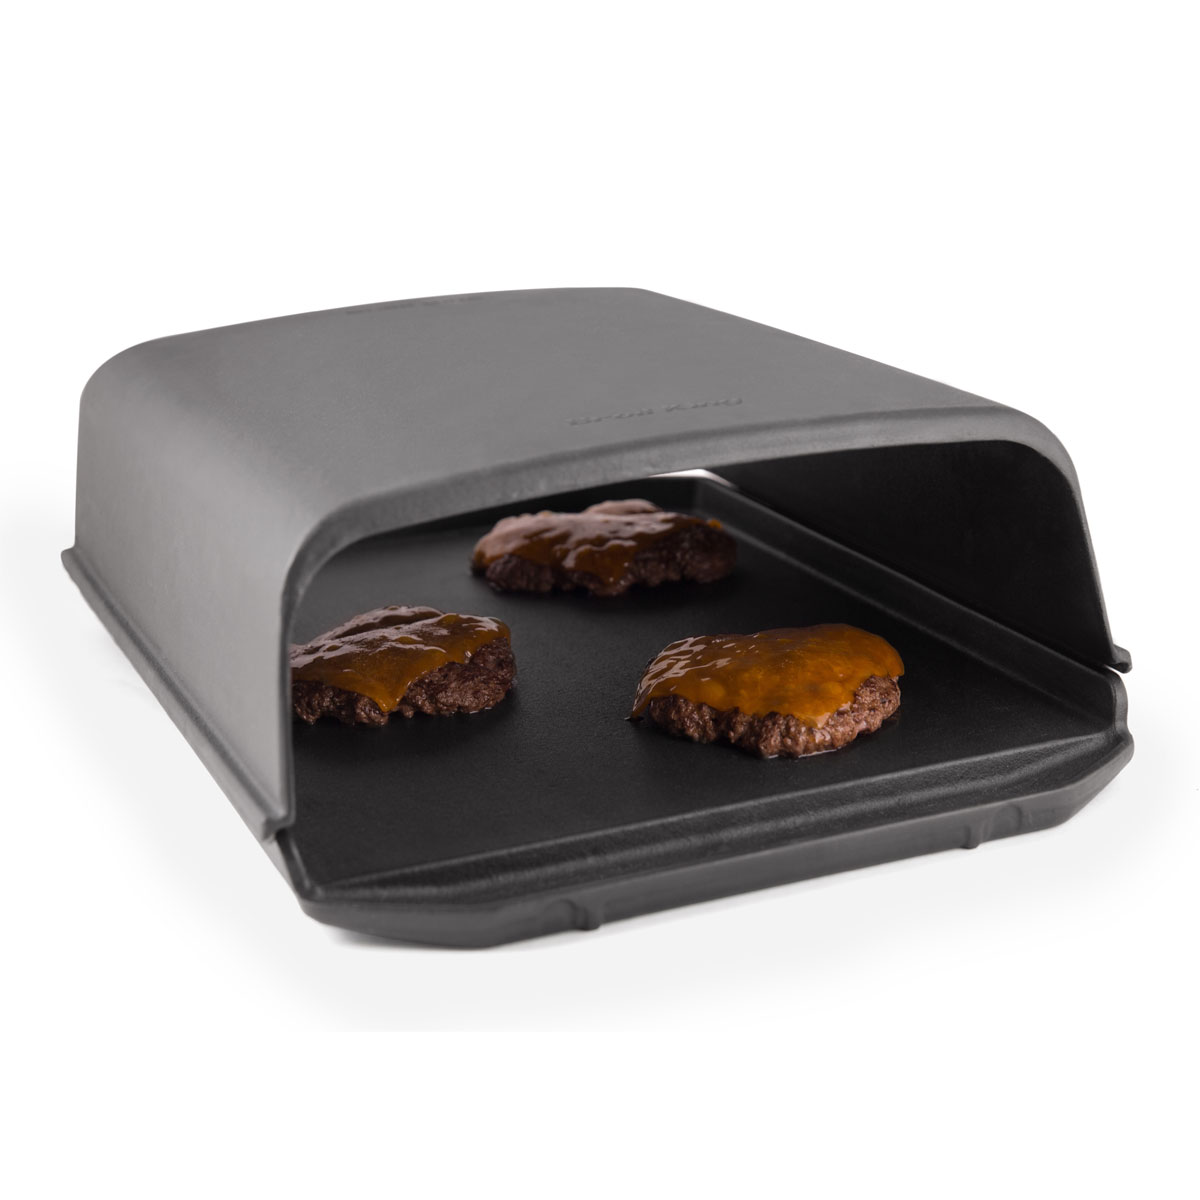 Broil King Cooking Dome, Pizzaofen Gusseisen